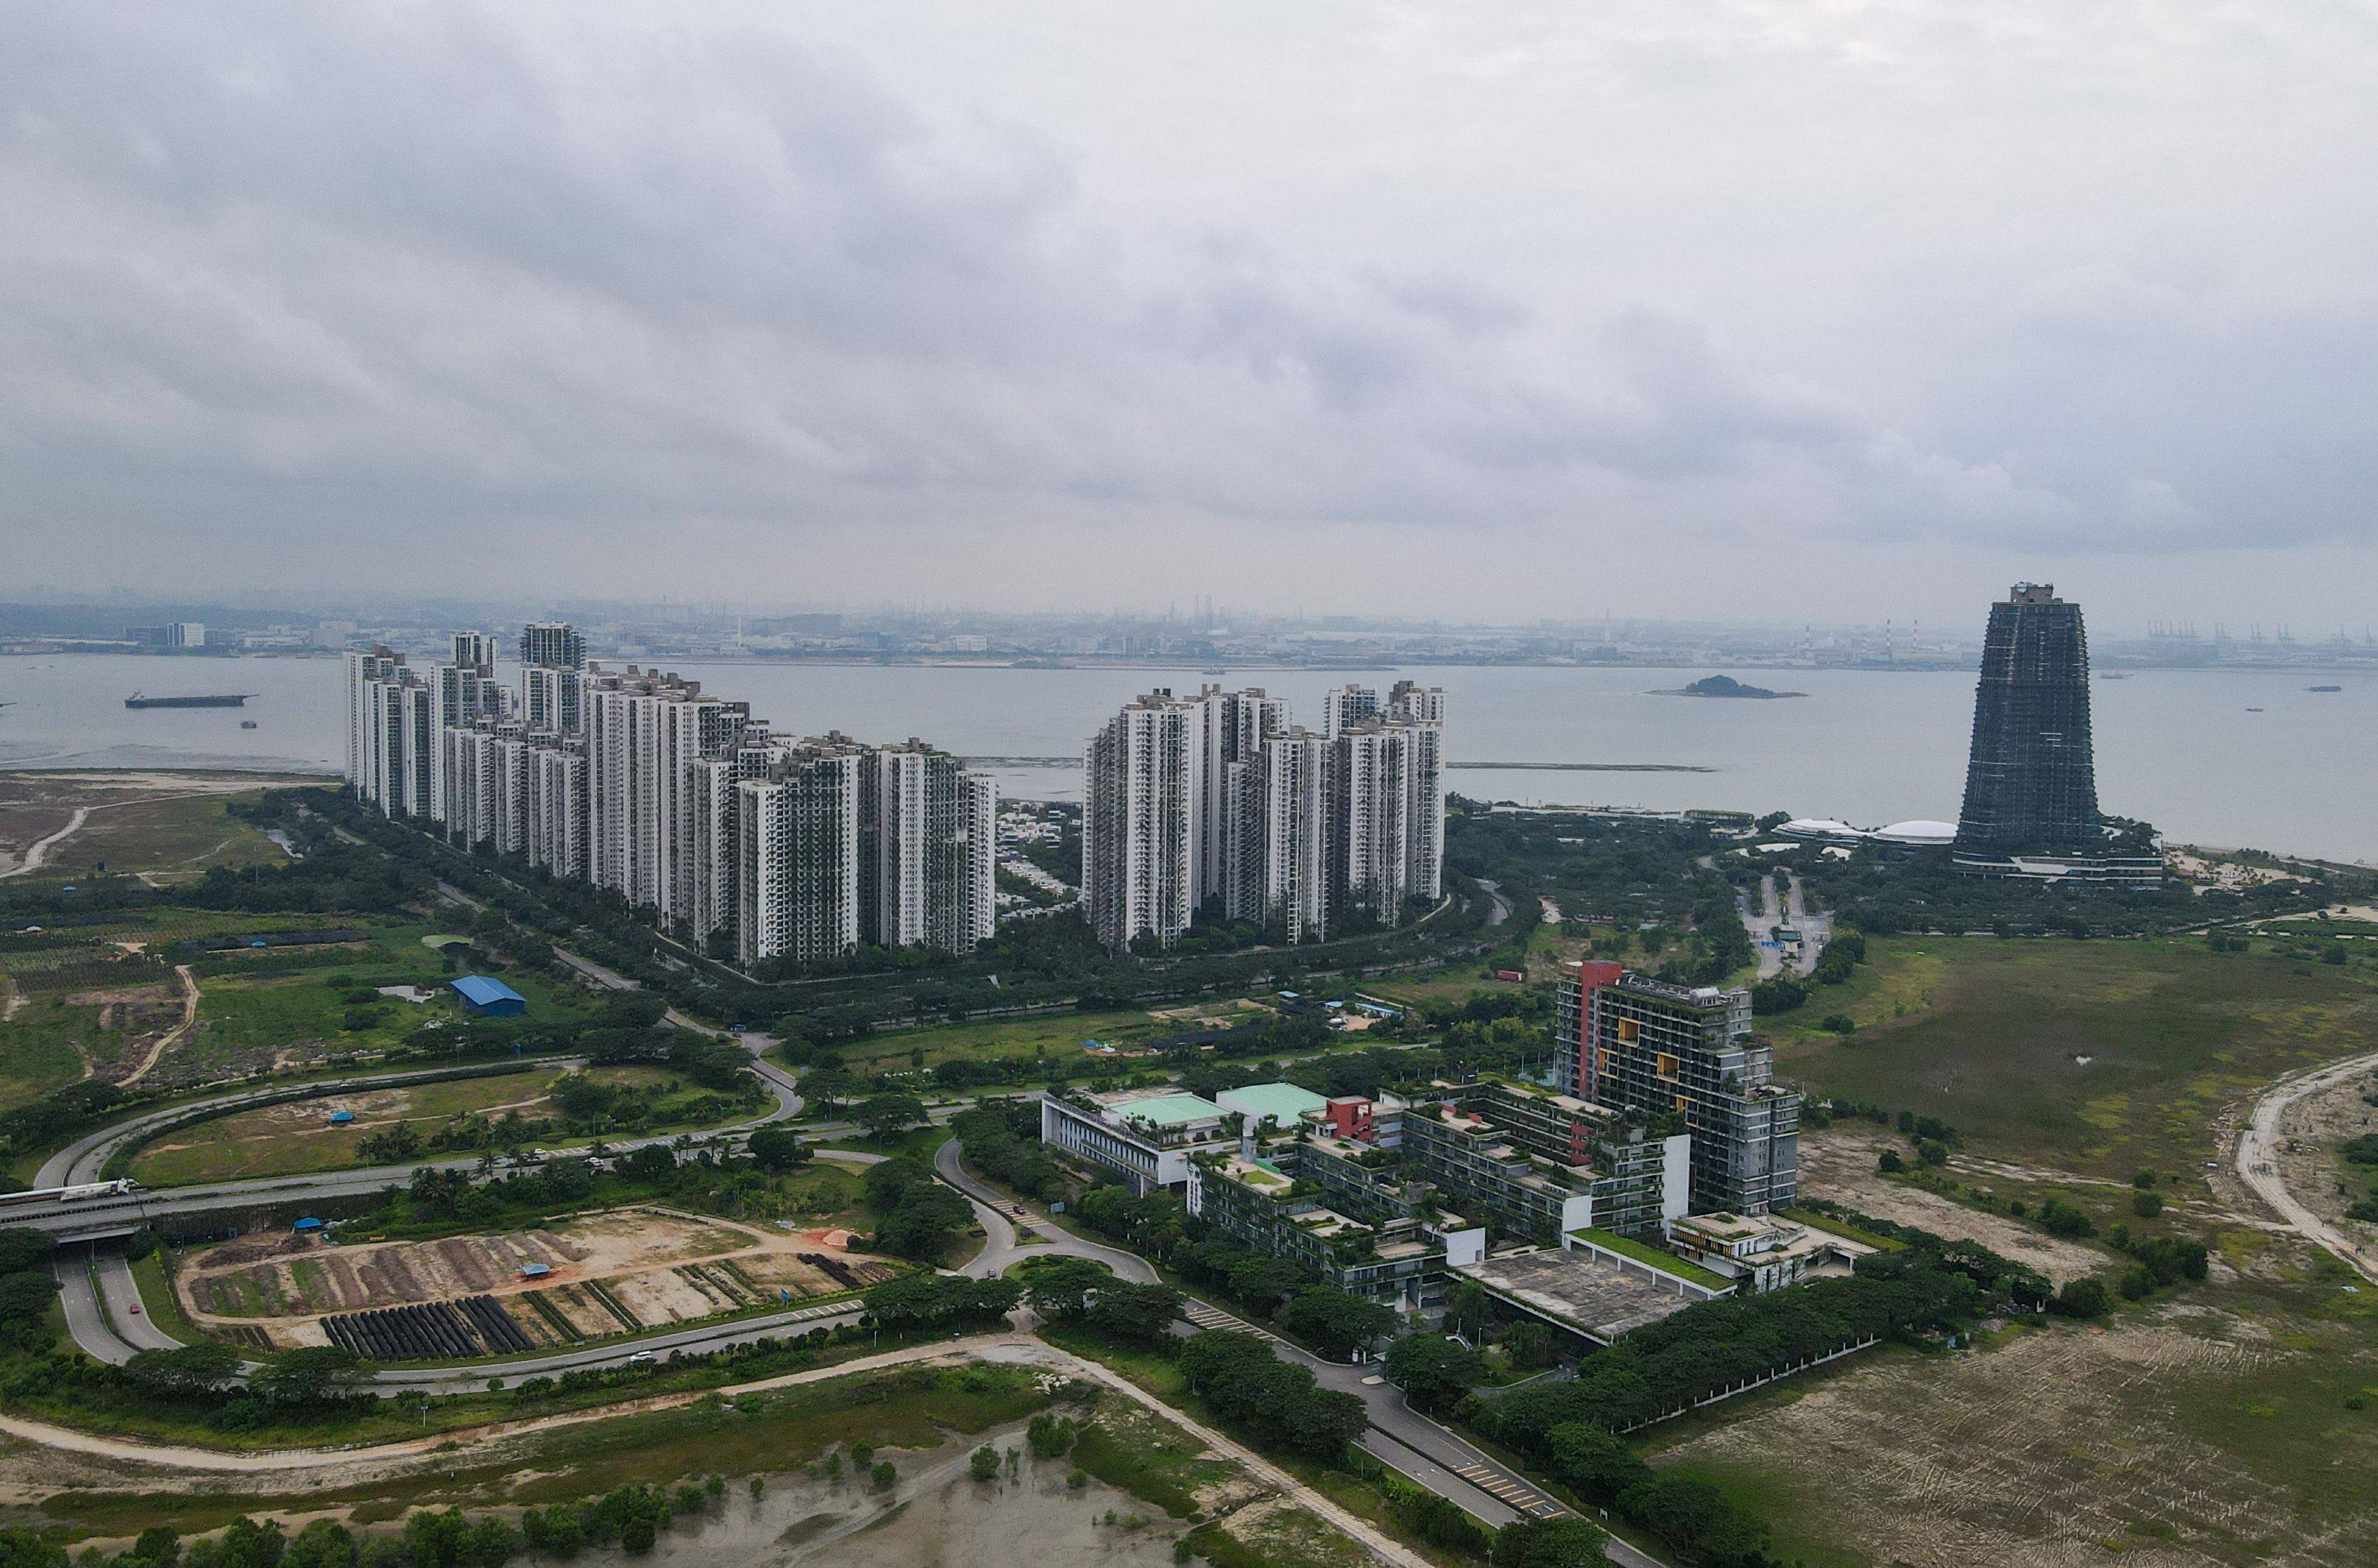 Condominiums at Forest City. Pegged to China’s ambitious Belt and Road Initiative, Forest City is Country Garden’s largest property development outside China. Photo: AFP